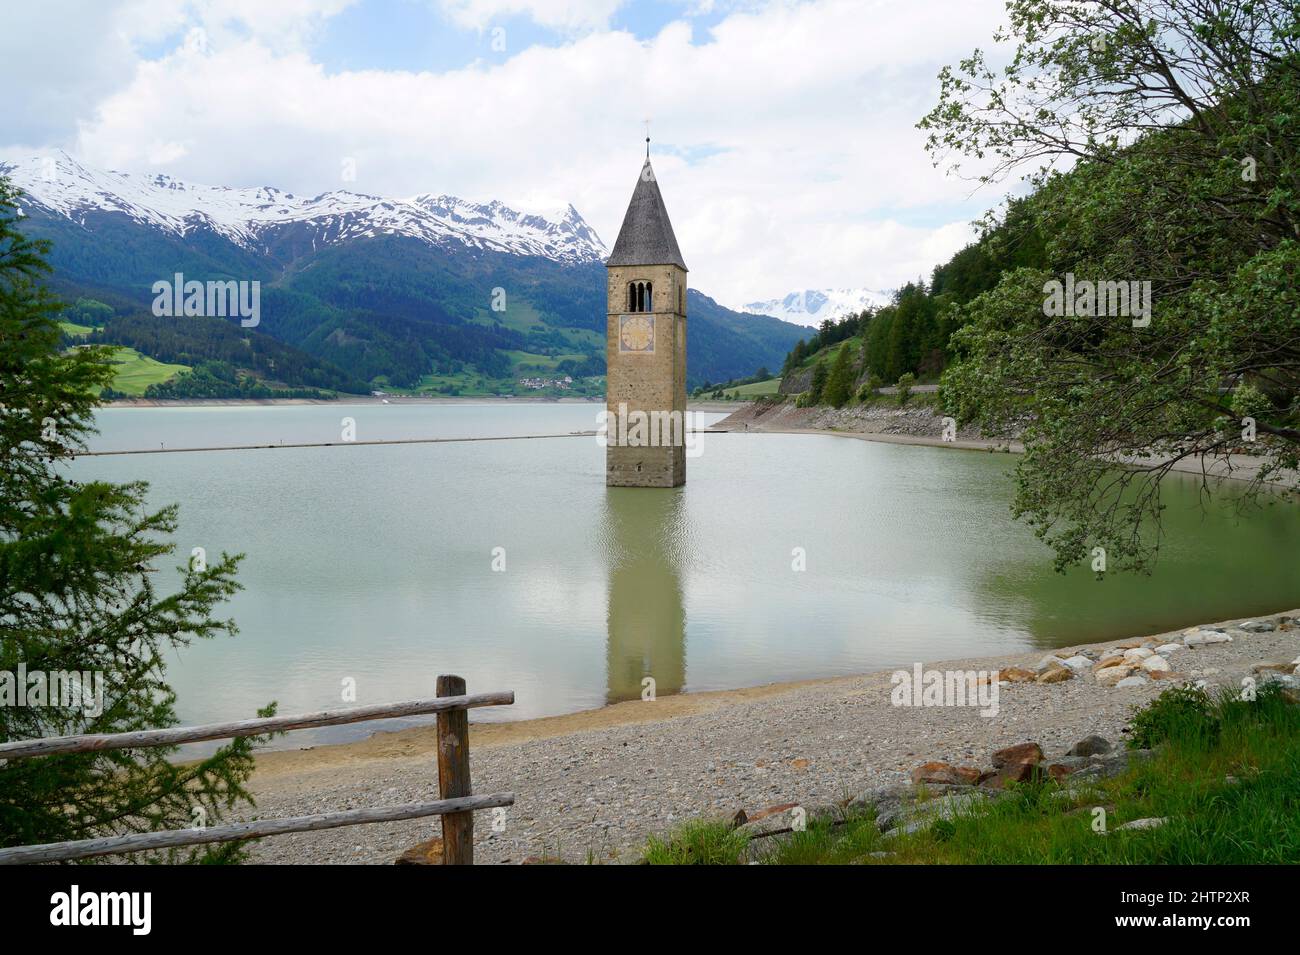 a picturesque view of lake Resia and the sunken church steeple of Lago di Resia in the Curon region (Vinschgau, South Tyrol, Italy) Stock Photo